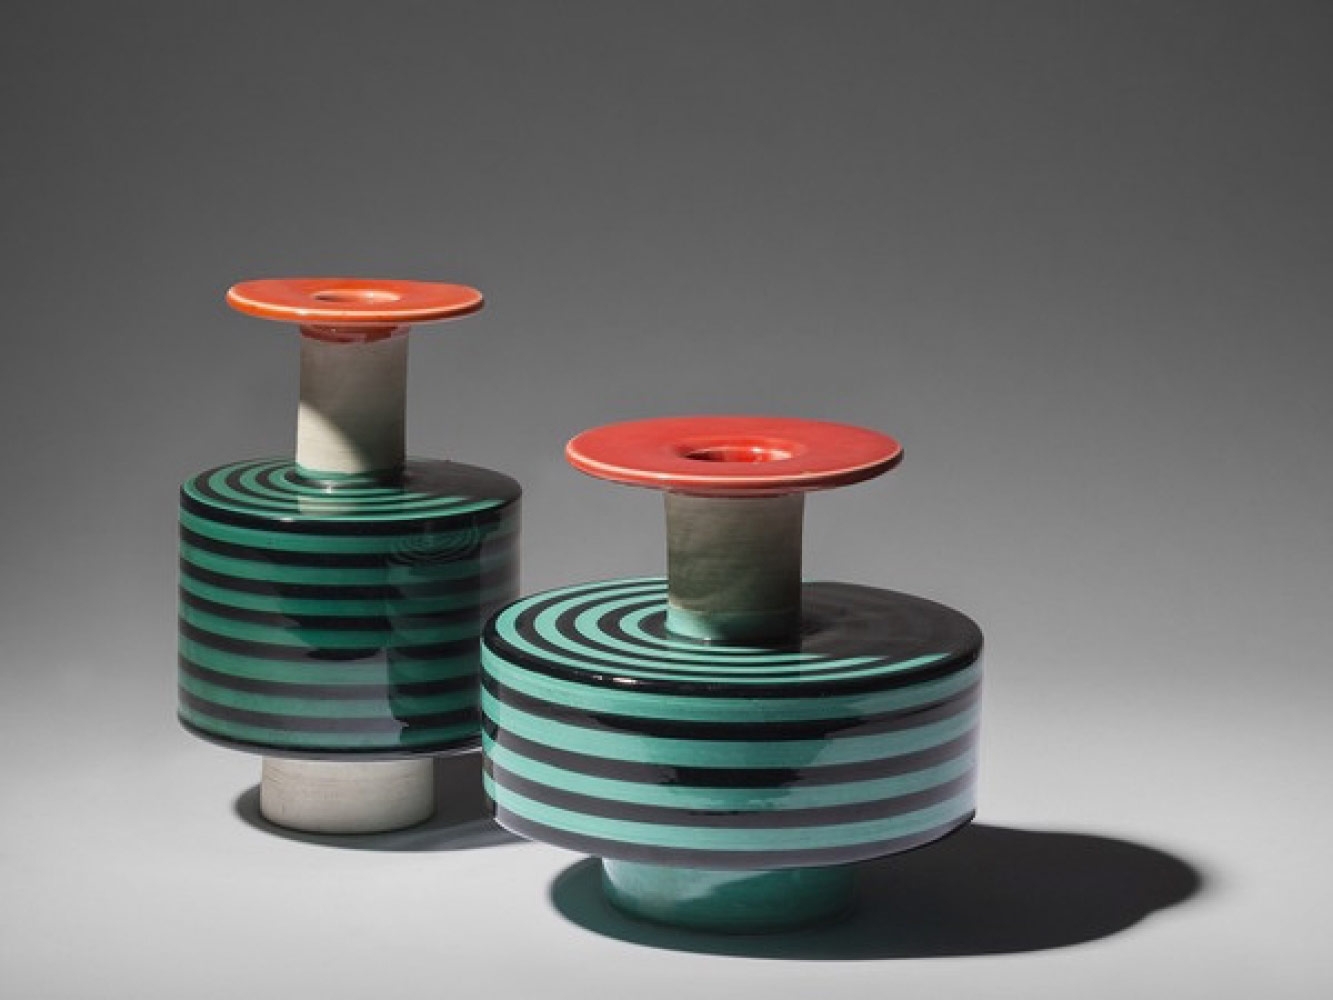 Pair of vases, model 183 and model 182, presented within the exhibition “Dialogo. Ettore Sottsass”